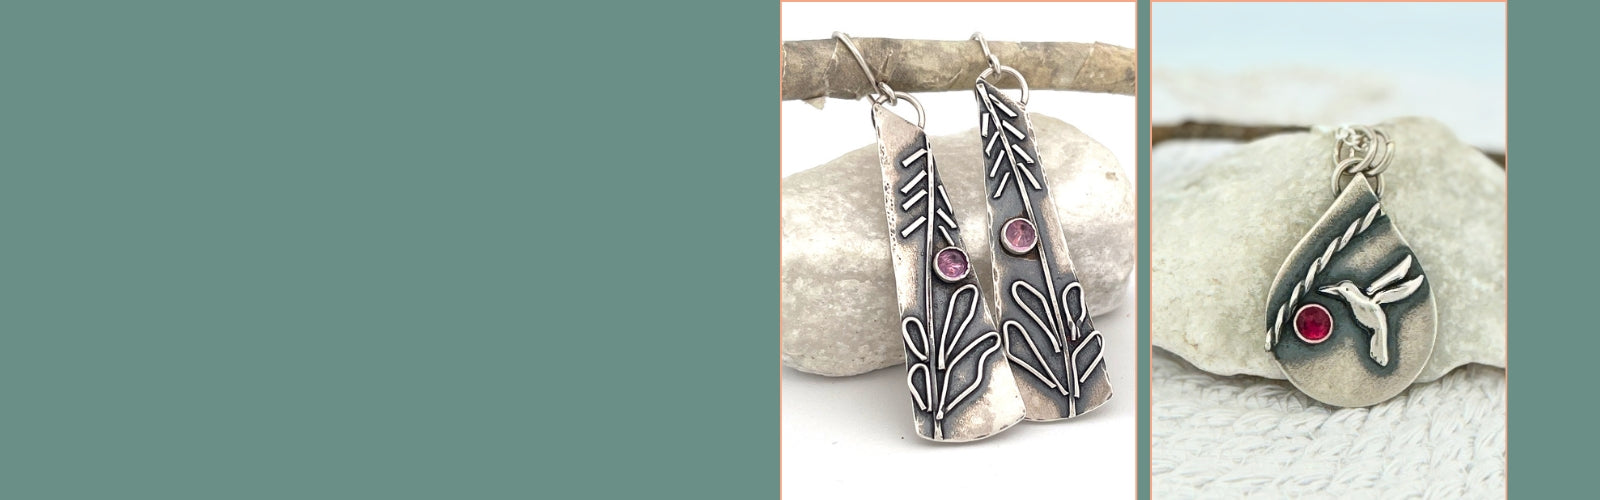 fireweed silver earrings and hummingbird silver necklace